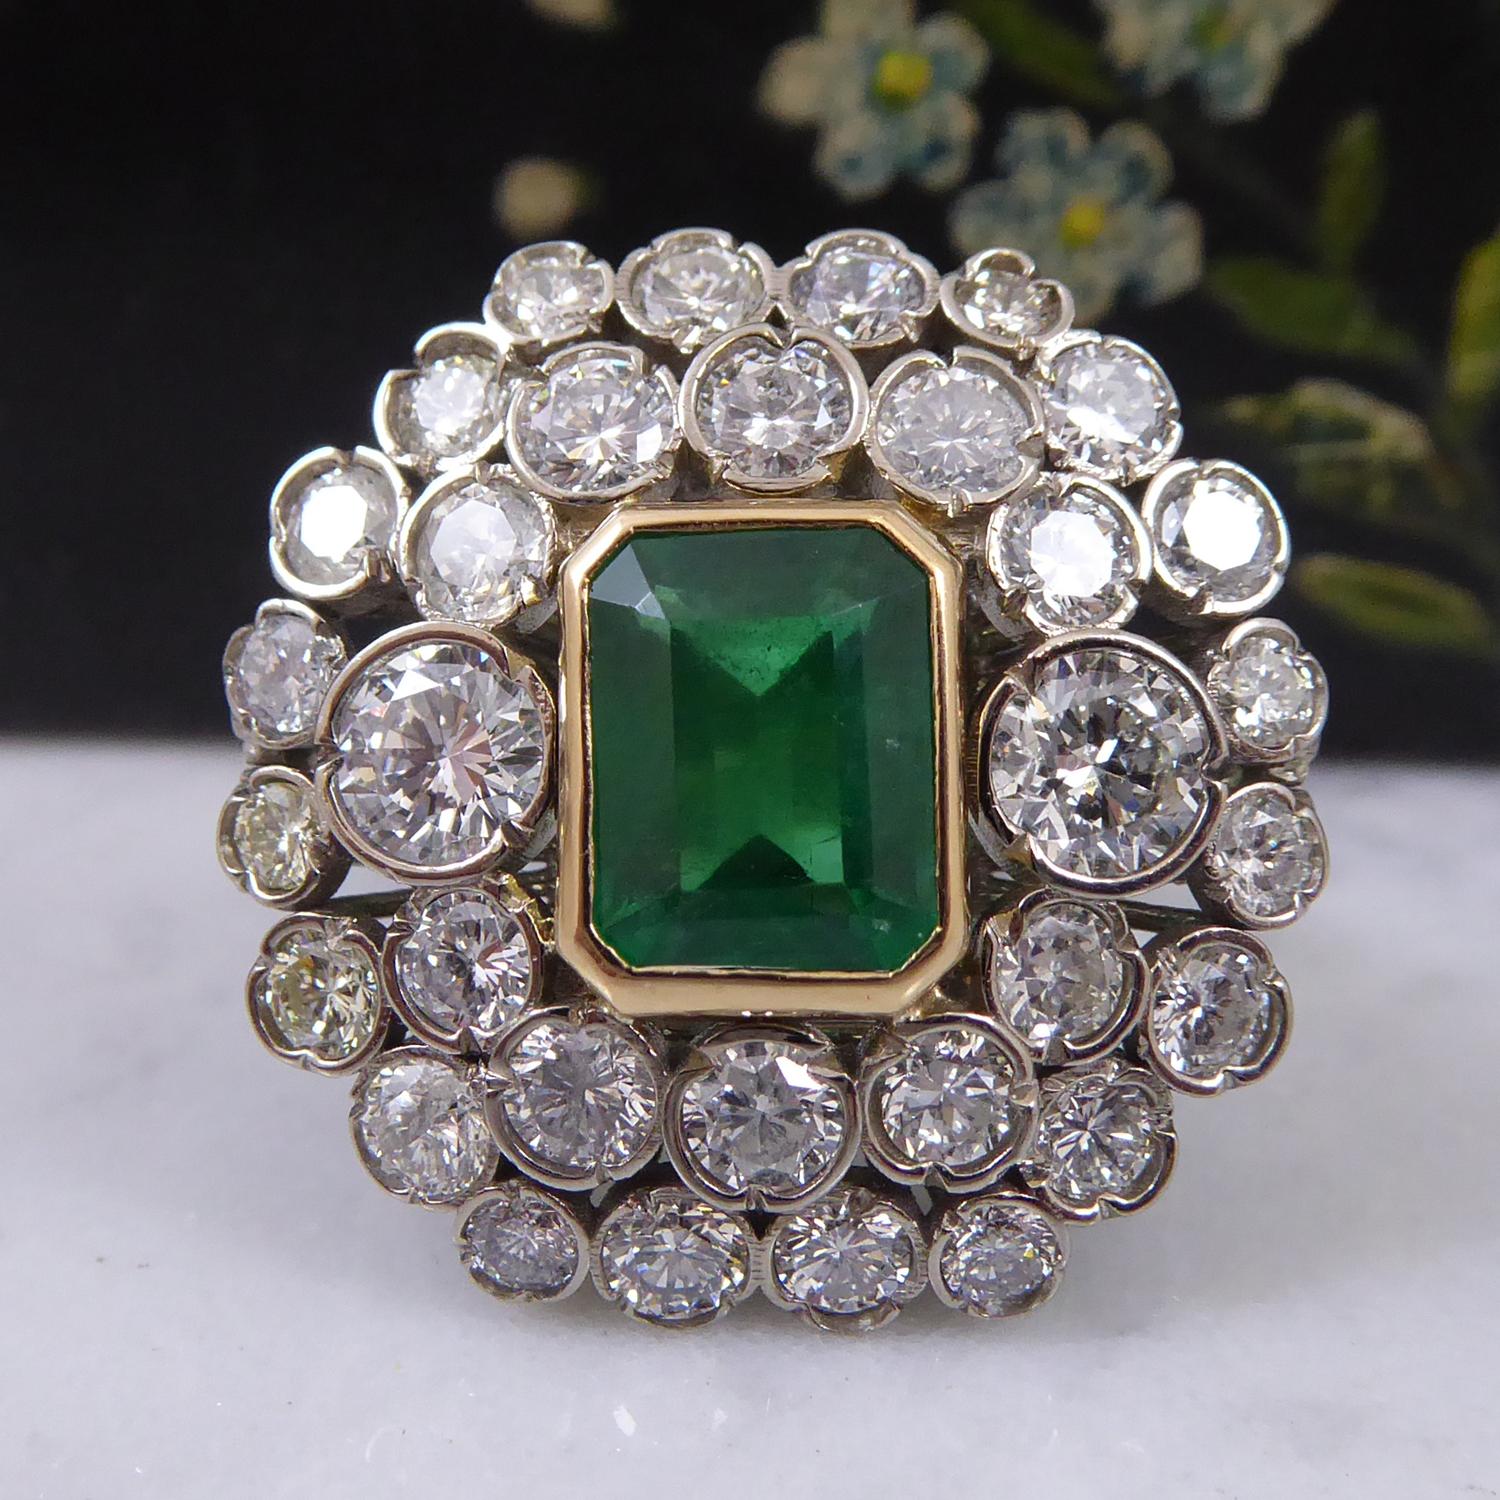 A spectacular emerald and diamond cocktail cluster ring.  The ring is set to the centre with a octagonal step cut, medium to dark green emerald, measuring approx. 8.20mm x 5.80mm 4.76mm deep, with an estimated weight of 1.66ct.  A double border of